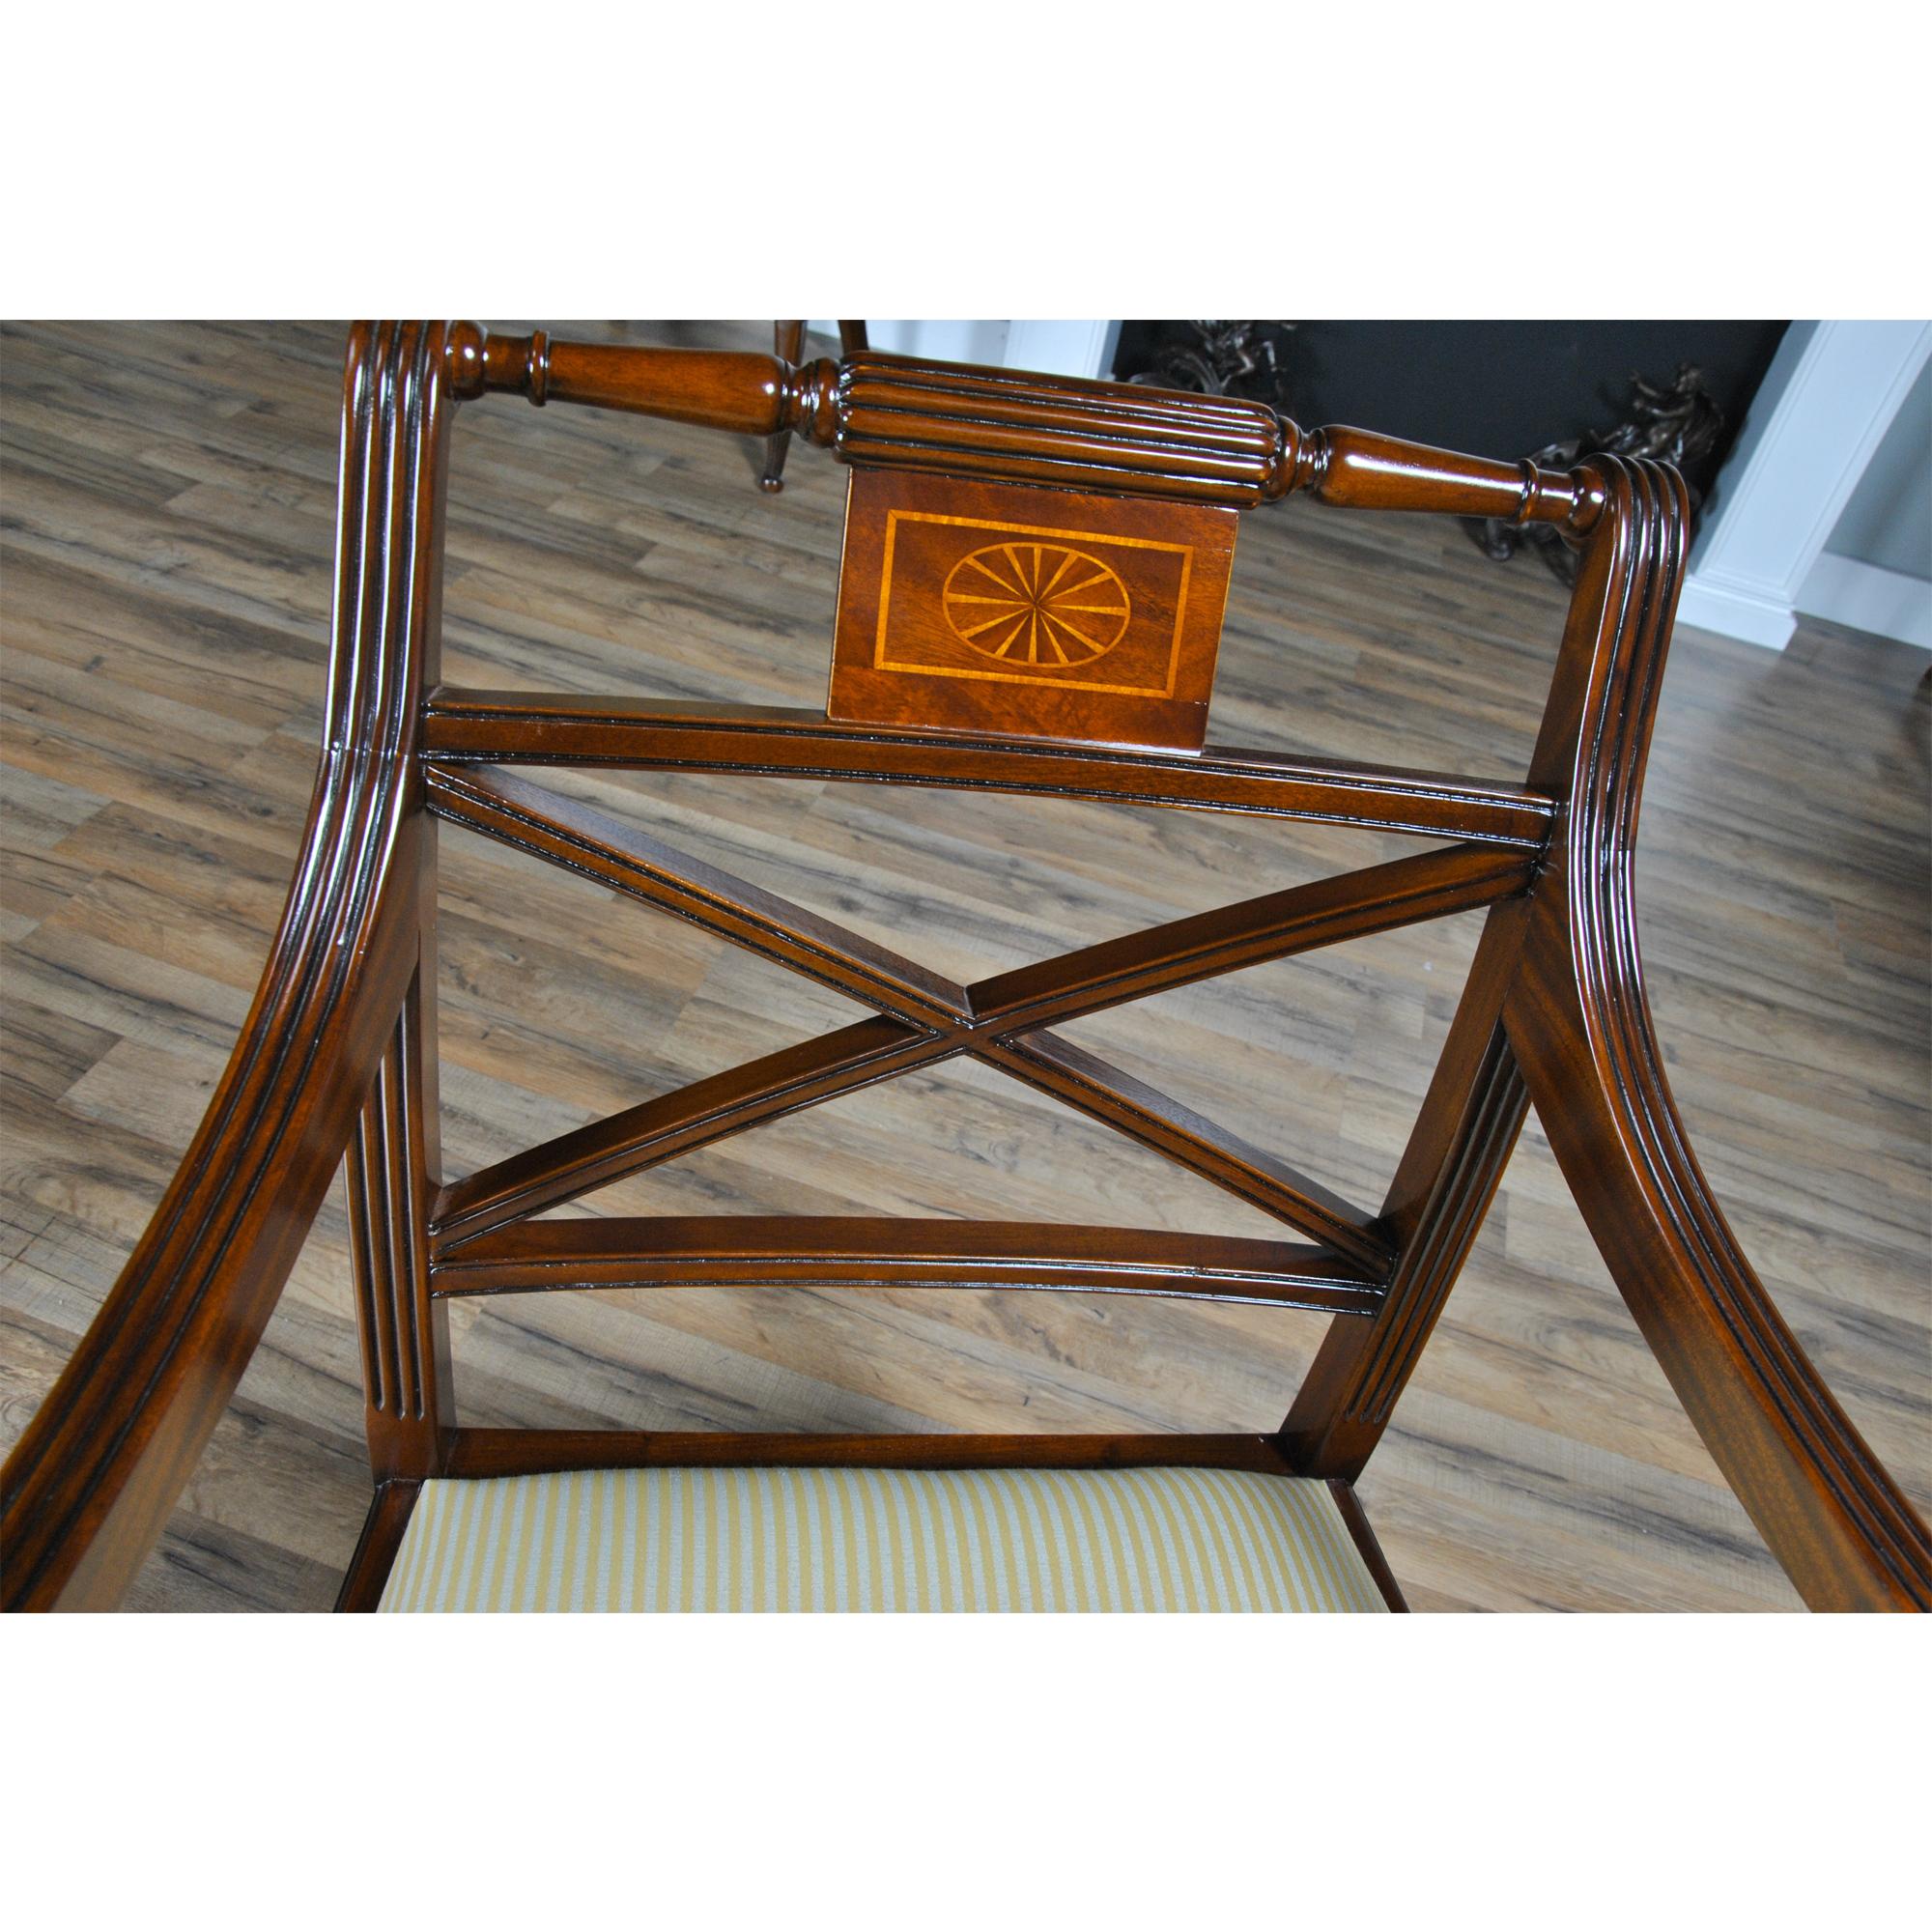 Sheraton Mahogany Inlaid Chairs, Set of 10  In New Condition For Sale In Annville, PA